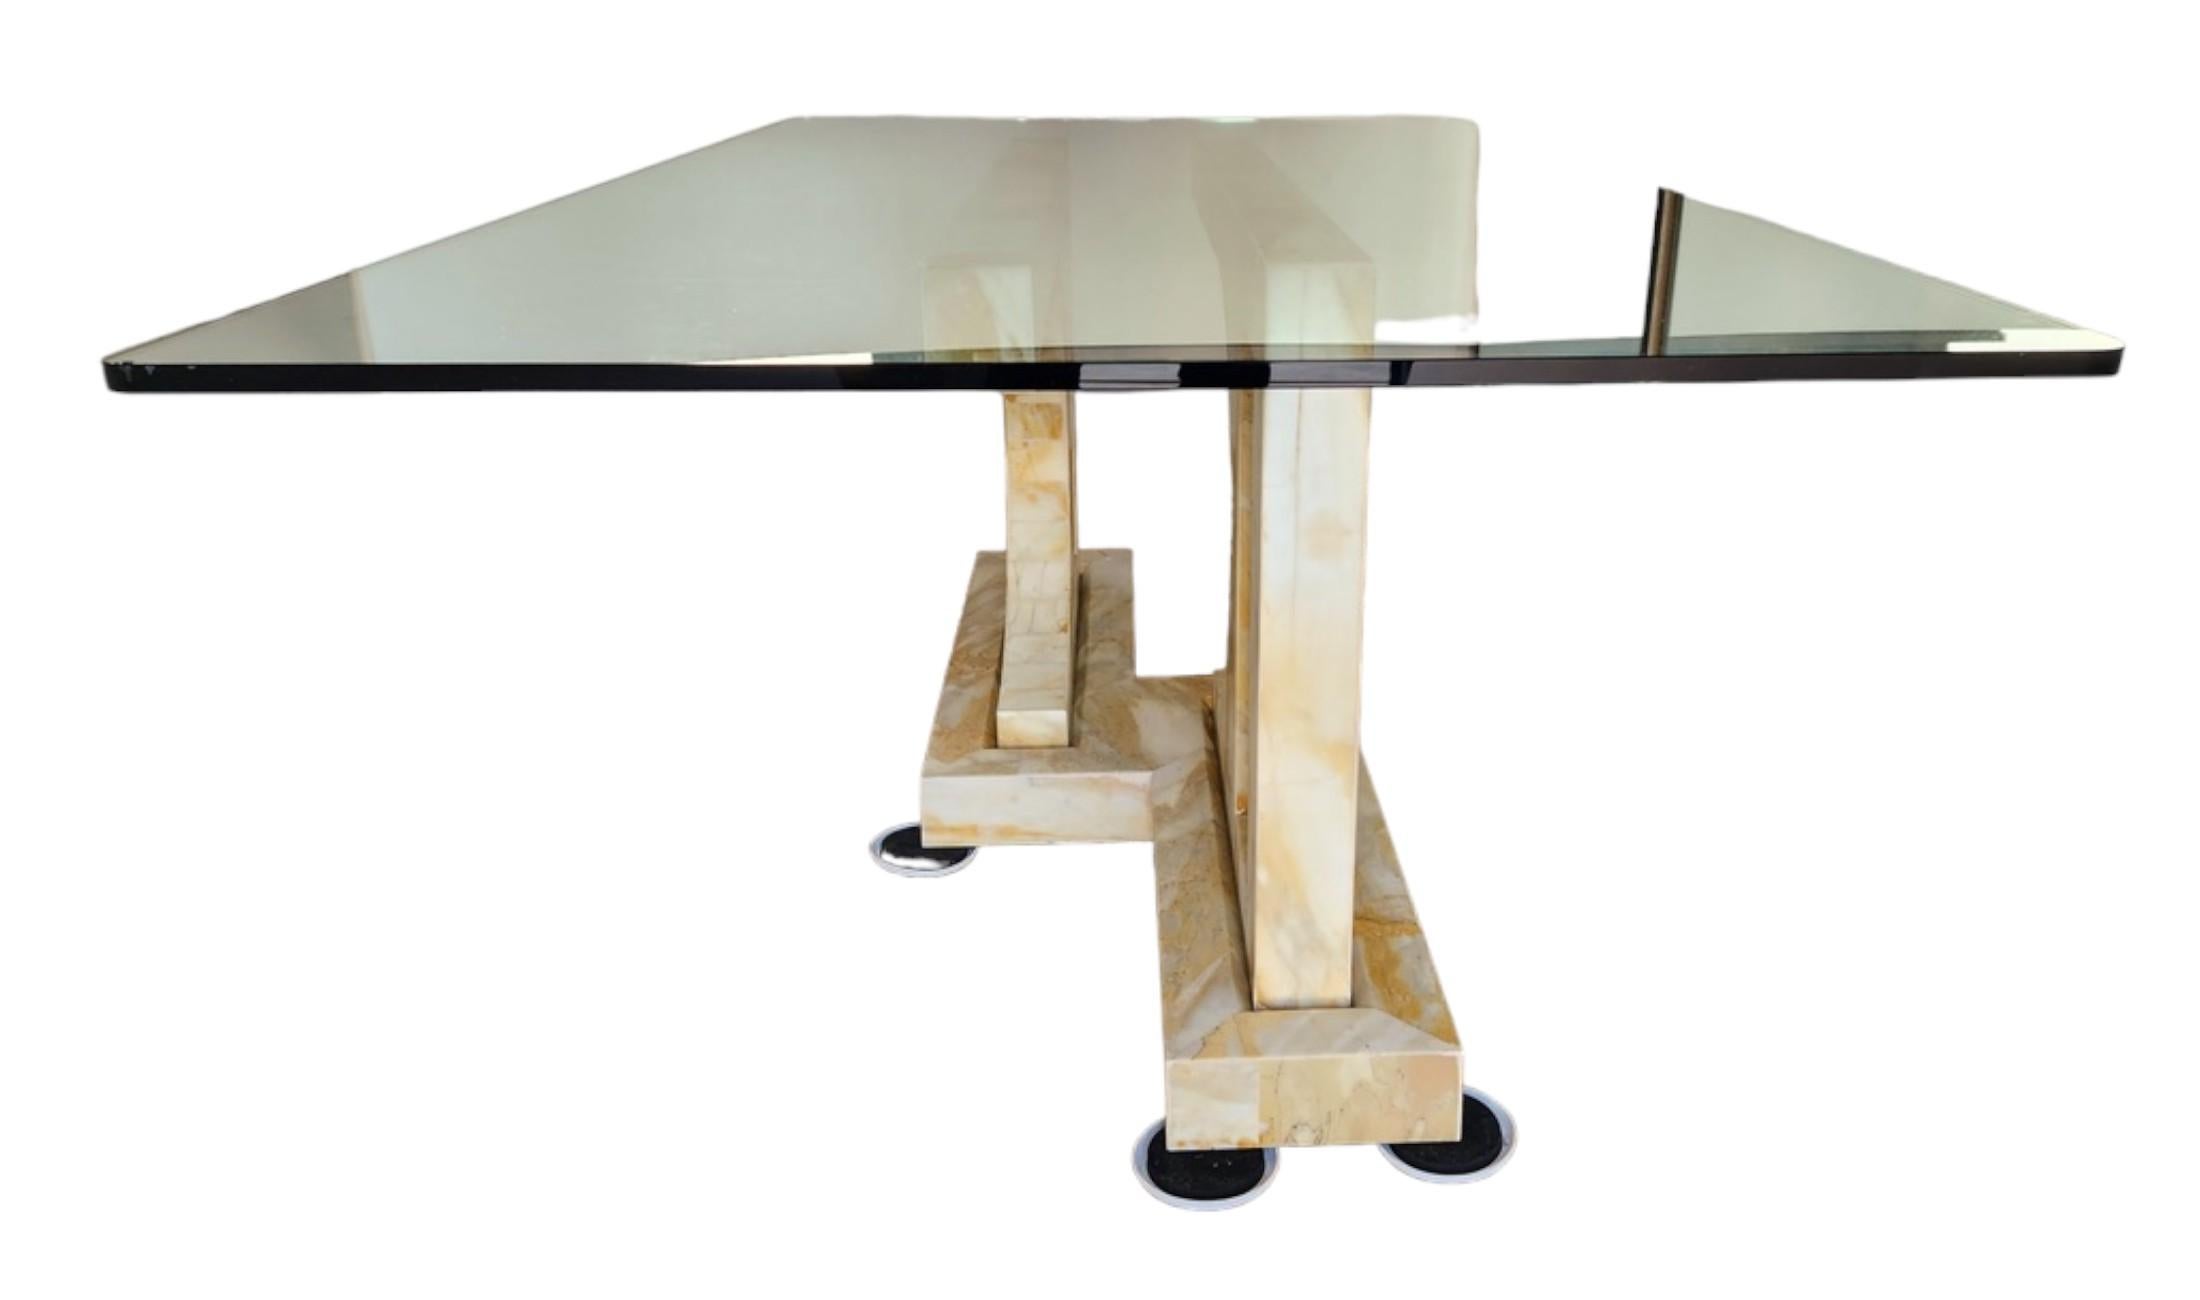 A rare commissioned marble table base designed and fabricated by Paul Puccio for a New York Upper East Side client signed and dated 1976.
The base is made from Marble Giallo Siena one of the most beautiful, prestigious and detailed marbles that are